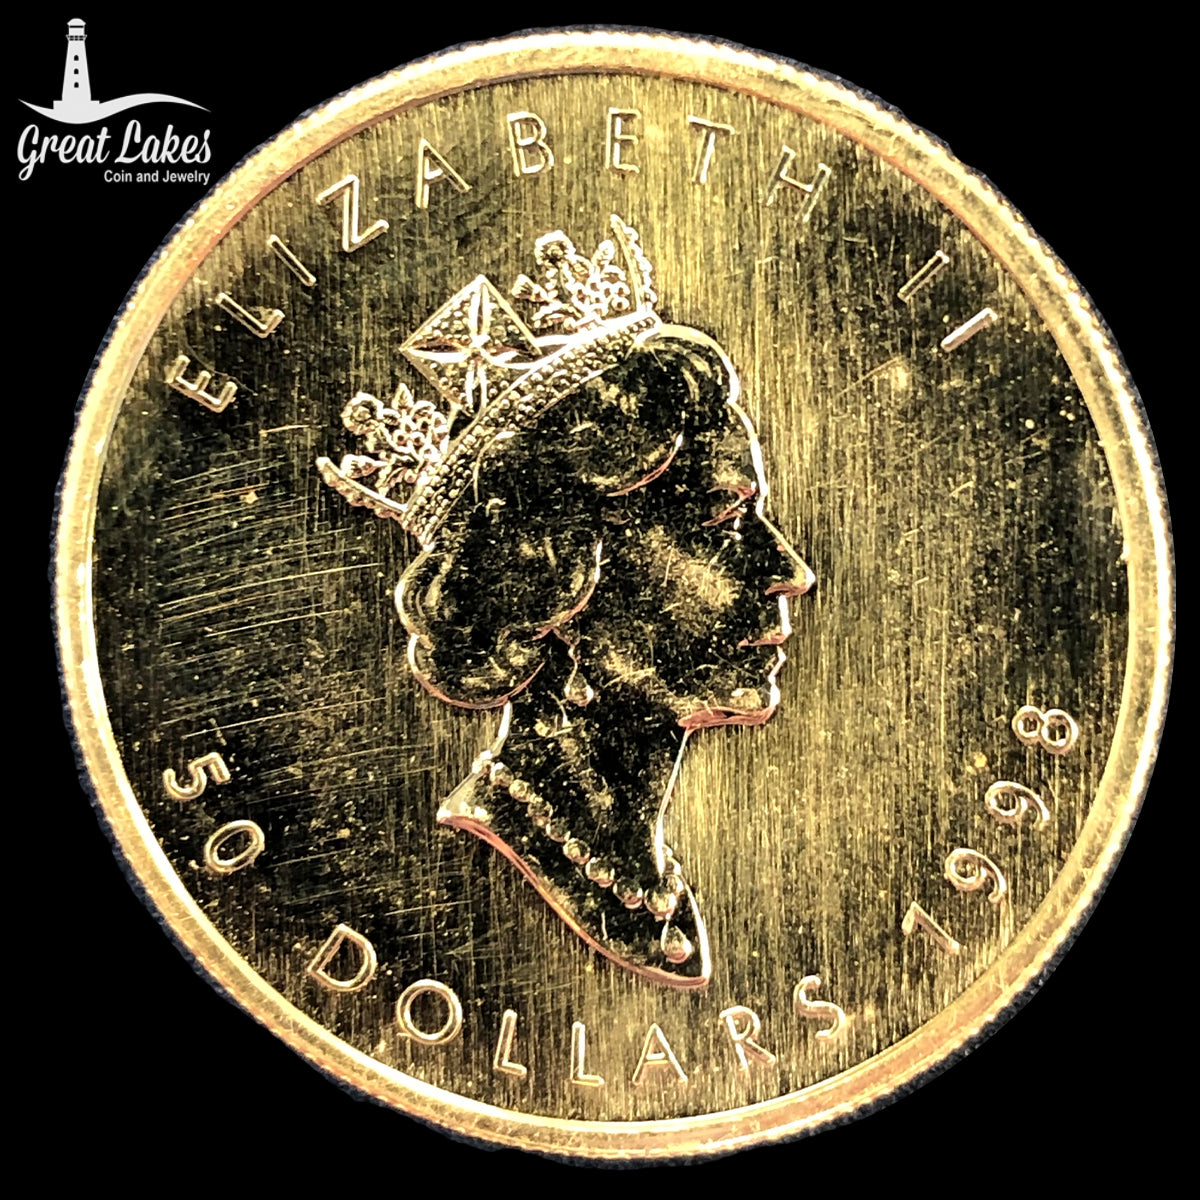 1998 1 oz Canadian Gold Maple